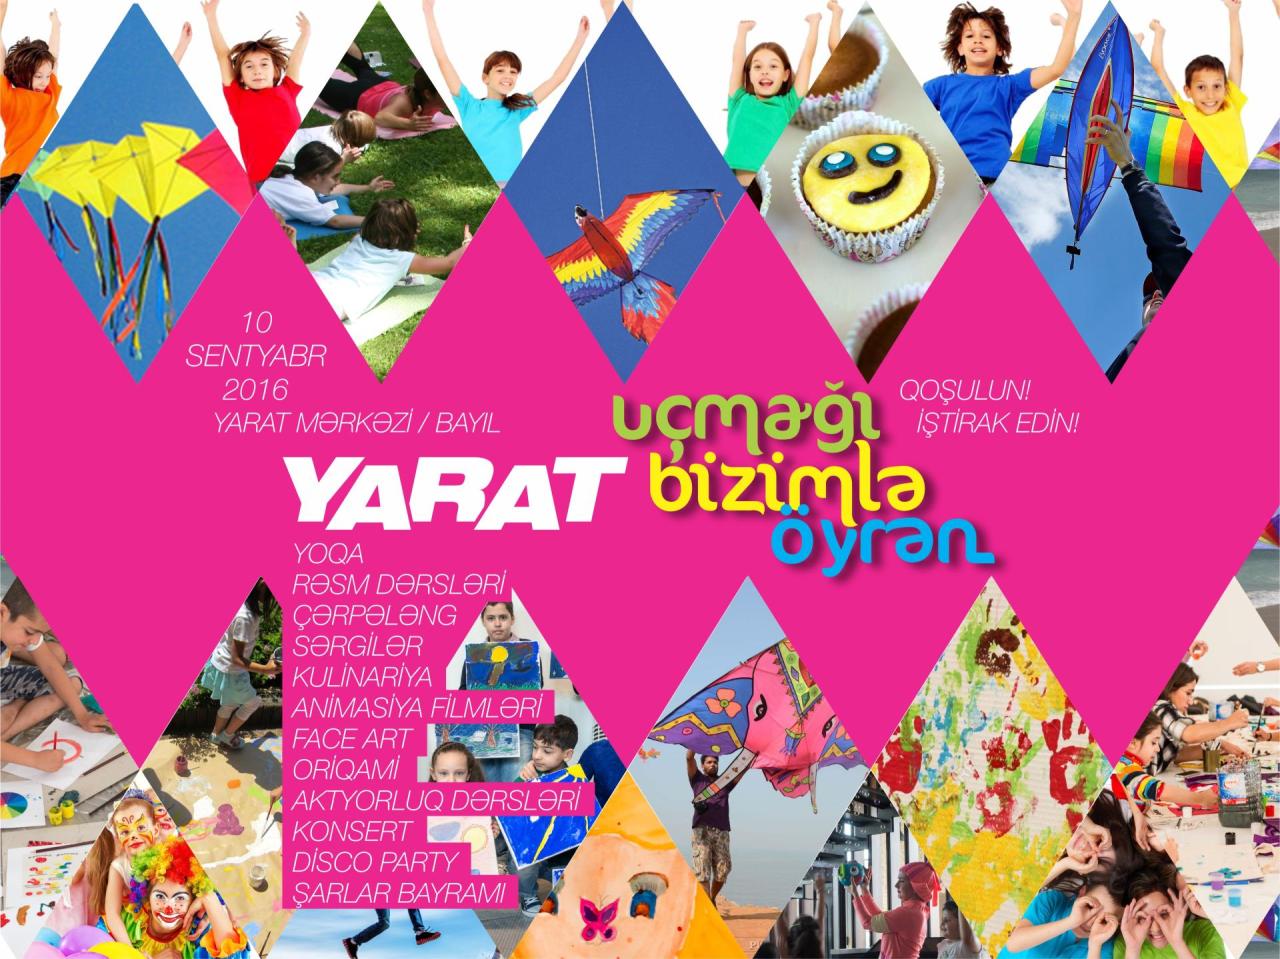 YARAT invites everyone to Children's Festival LEARN TO FLY [PHOTO]